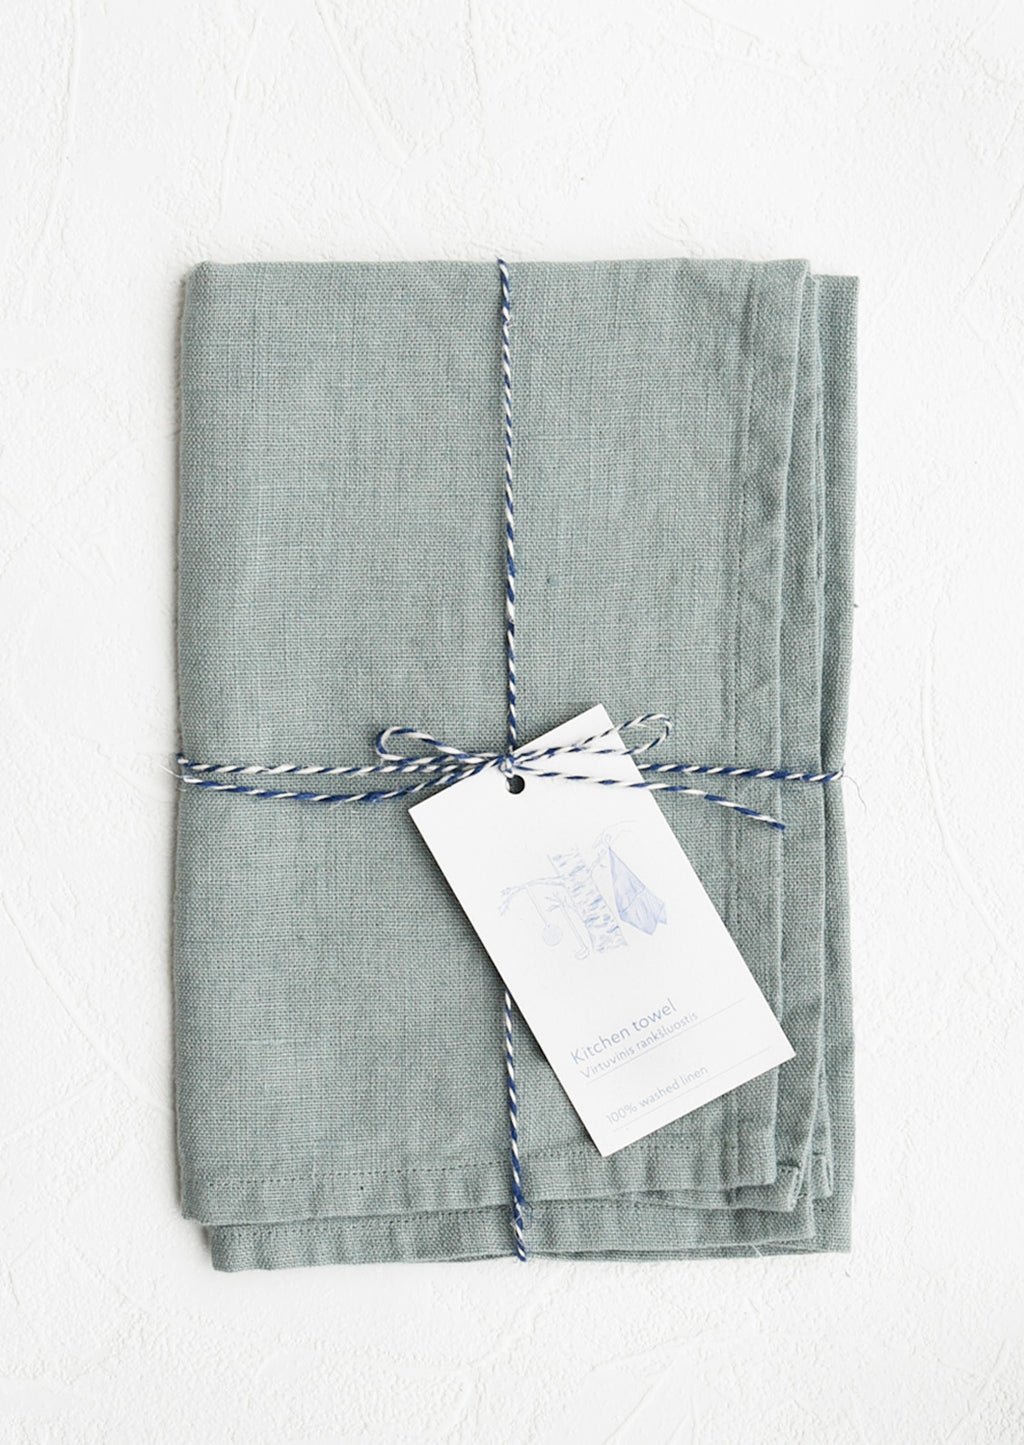 Lake Blue: A folded faded pale blue linen tea towel tied in baker's twine with a decorative hangtag